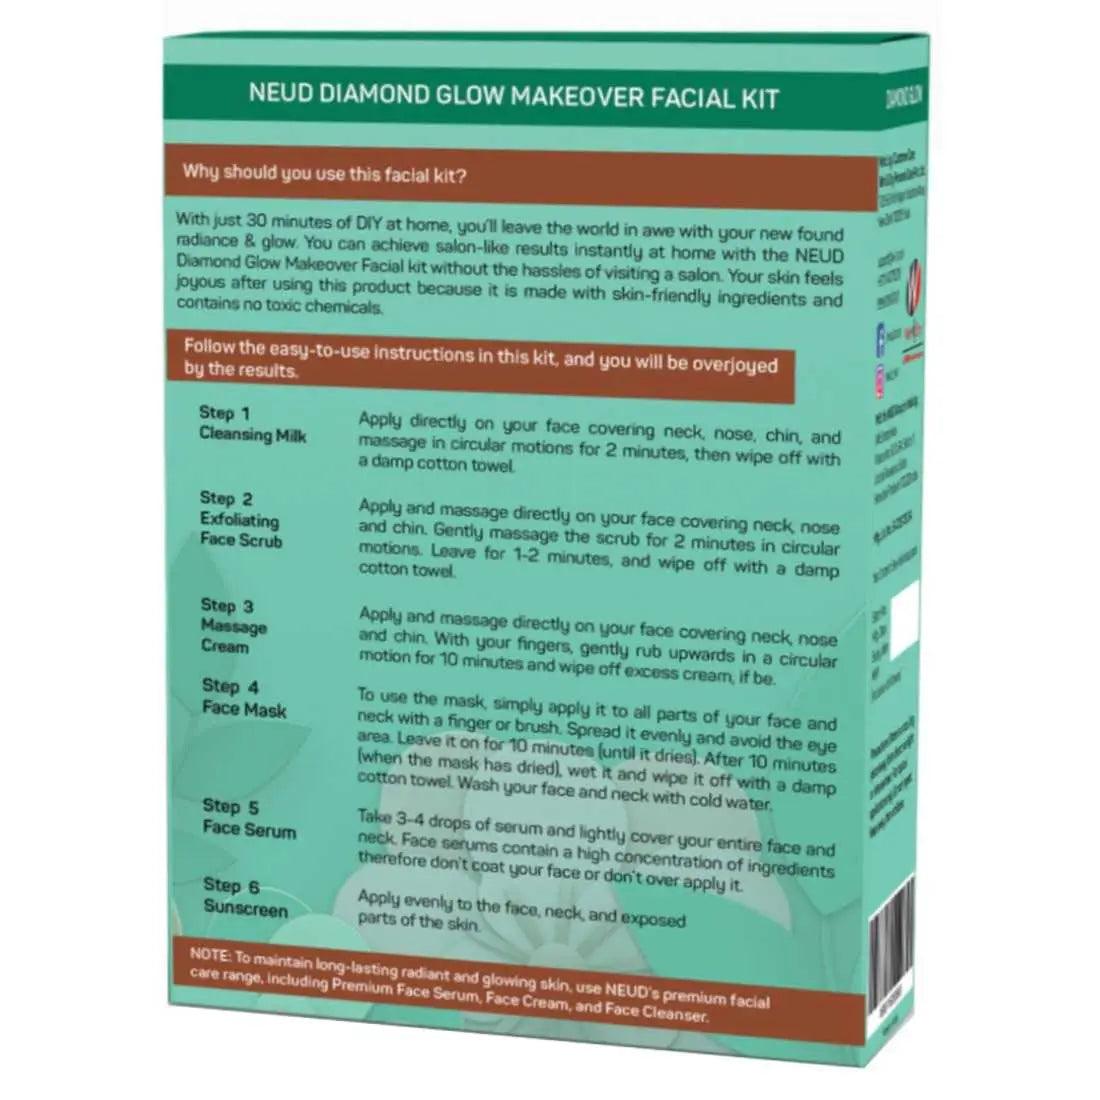 NEUD 6-Step DIY Makeover Facial Kit for Salon-Like Glow at Home